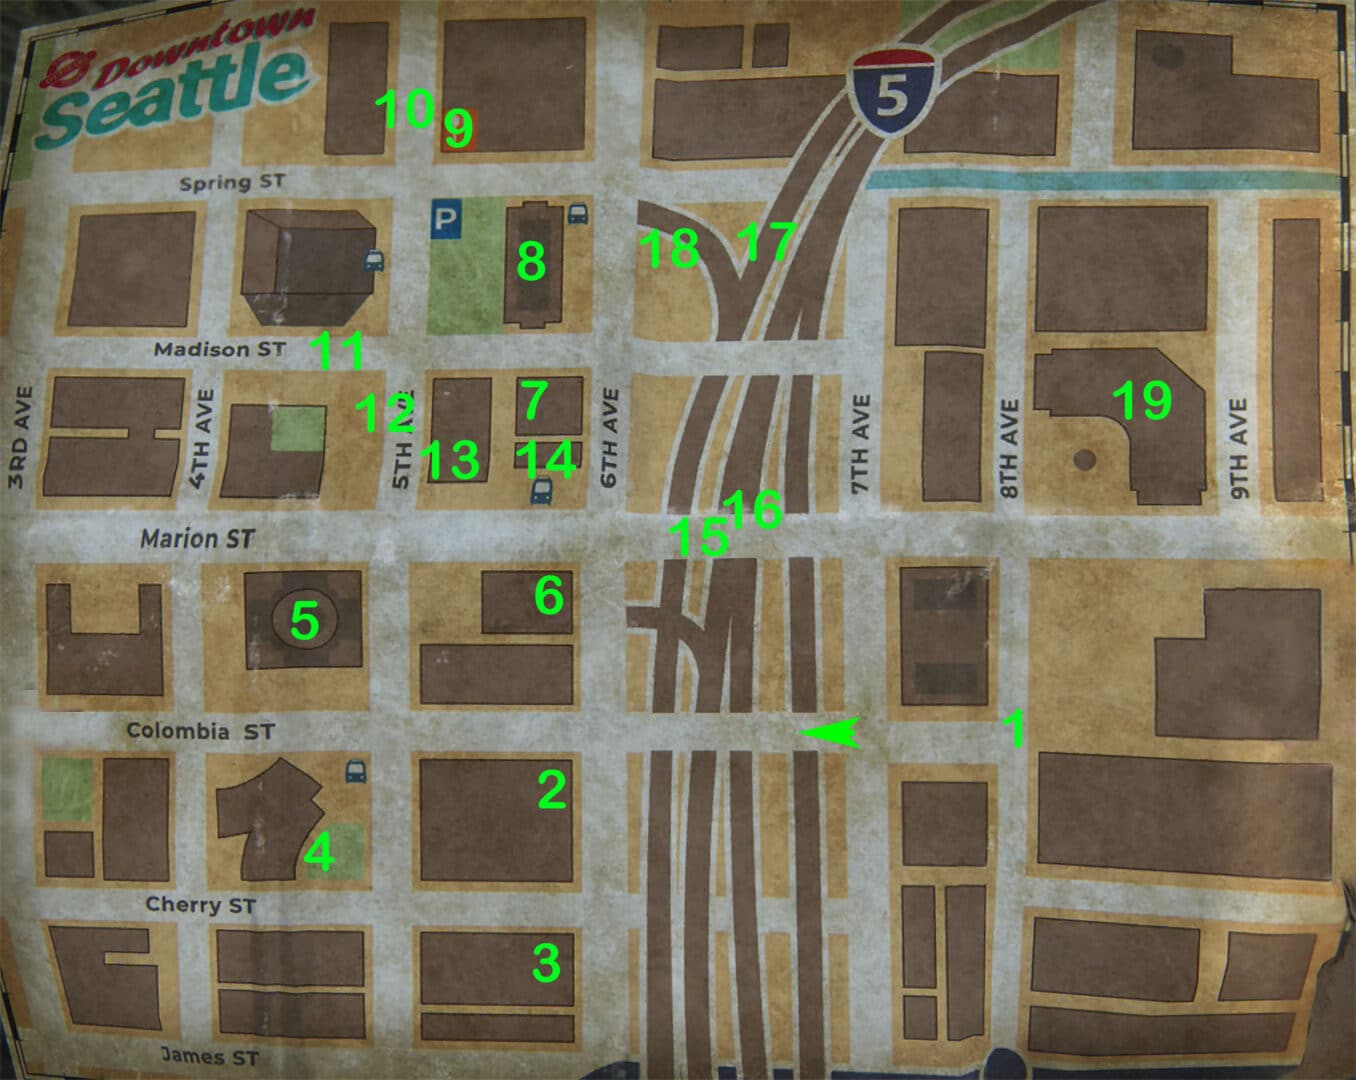 Seattle center map with markers, The Last of Us 2